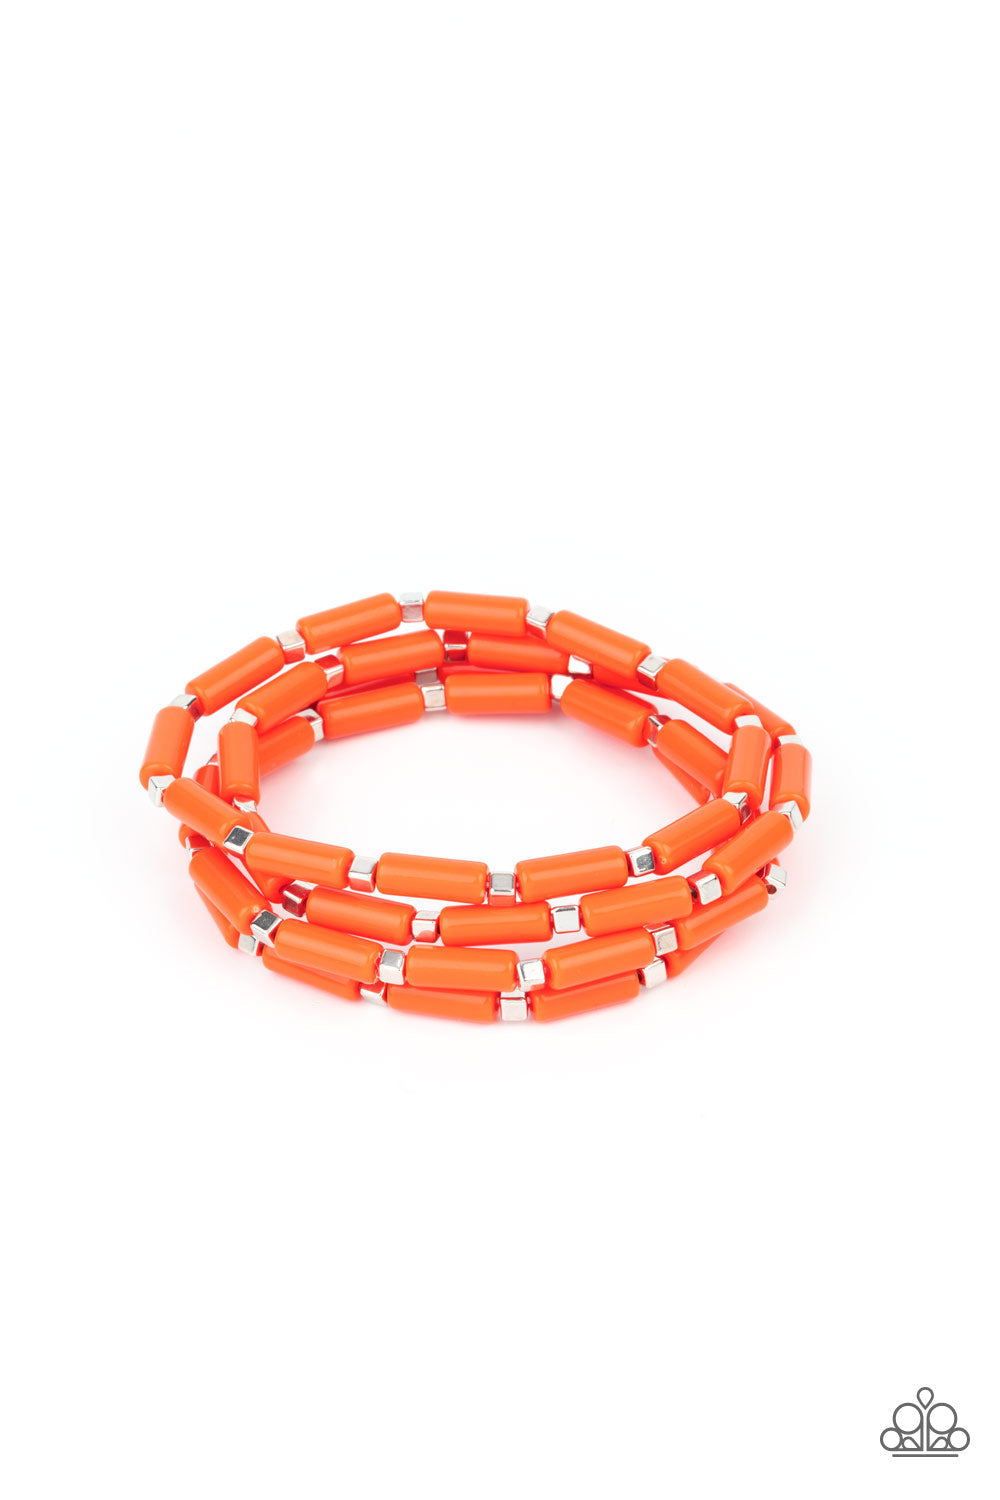 Radiantly Retro - Orange - Silver Stretchy Bracelets - Paparazzi Accessories - A playful collection of dainty silver cube beads and cylindrical orange beads along stretchy bands, creating colorful layers around the wrist. Sold as one set of four bracelets.